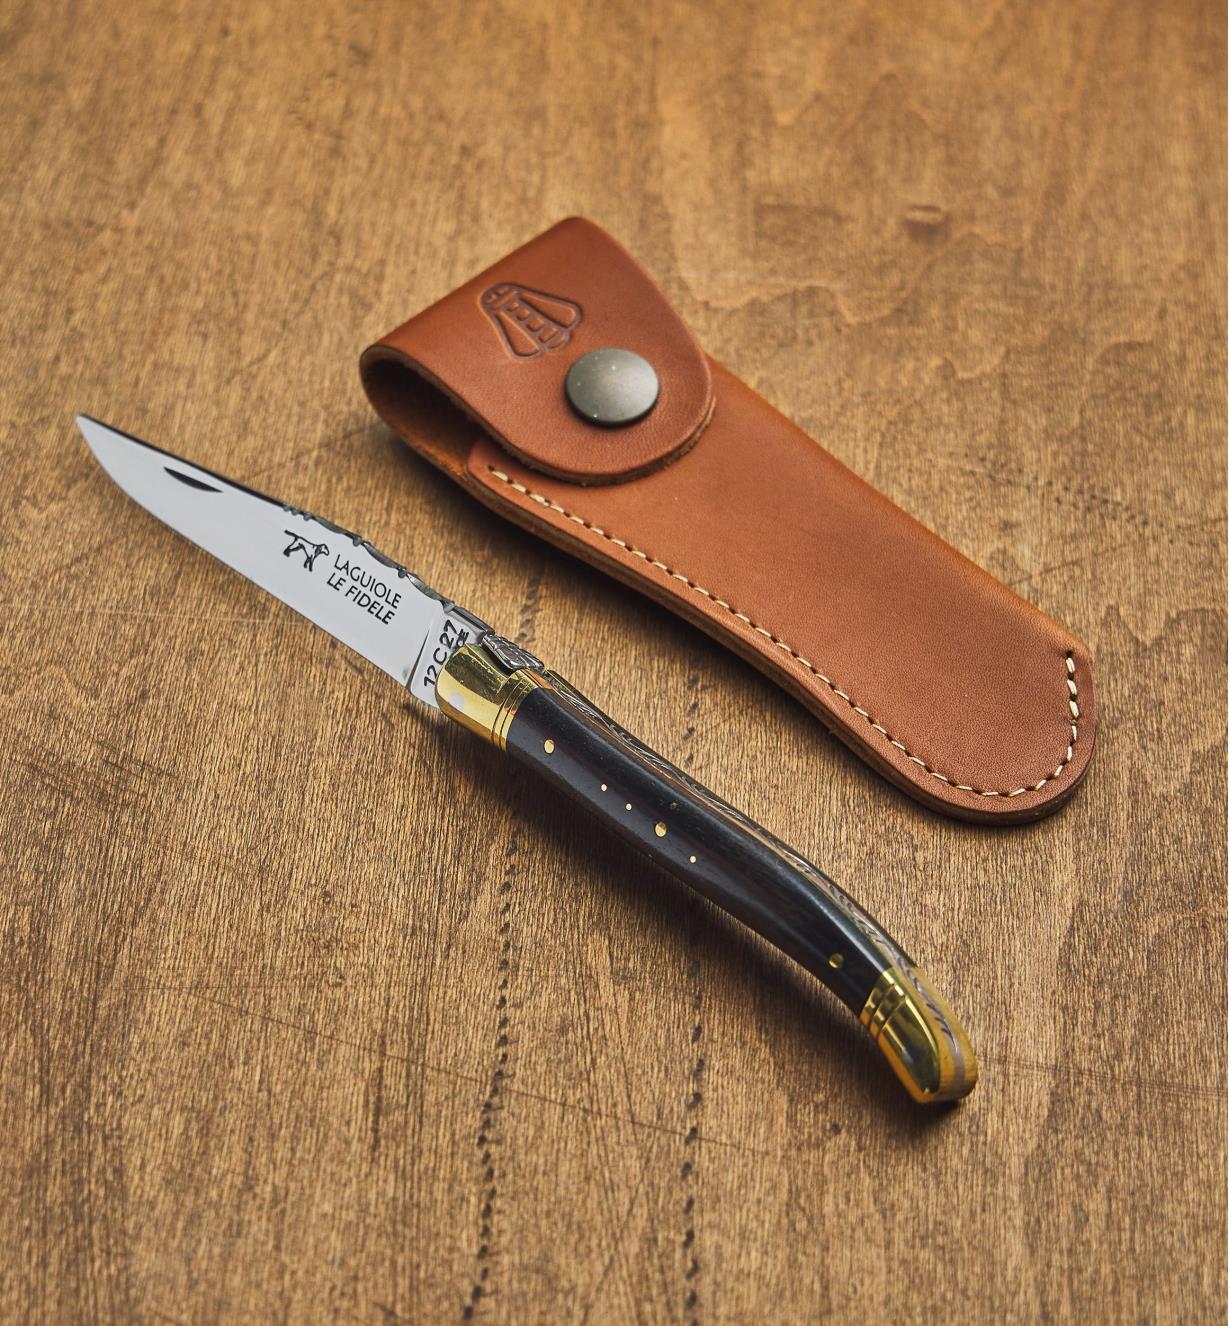 An open laguiole knife next to a leather case